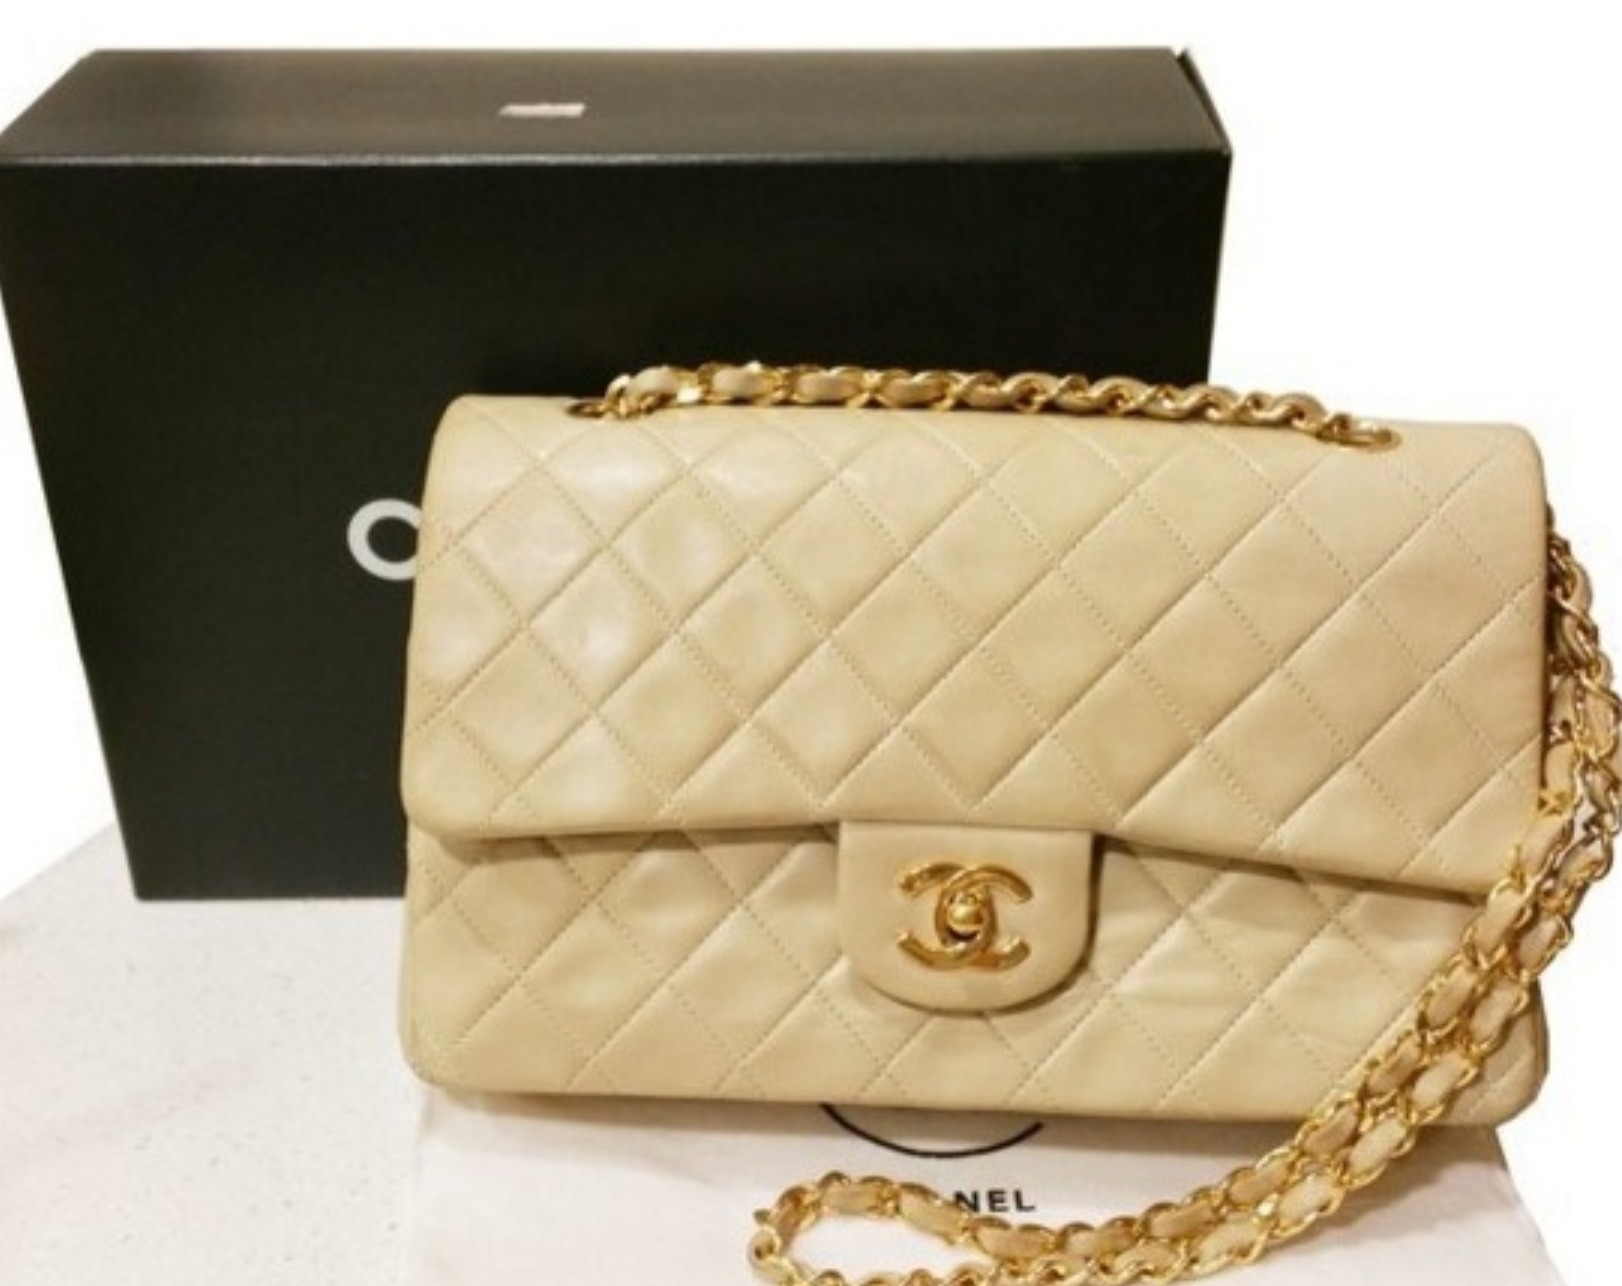 Chanel Ditches Fur And Exotic Animal Skins Citing Ethical Issues